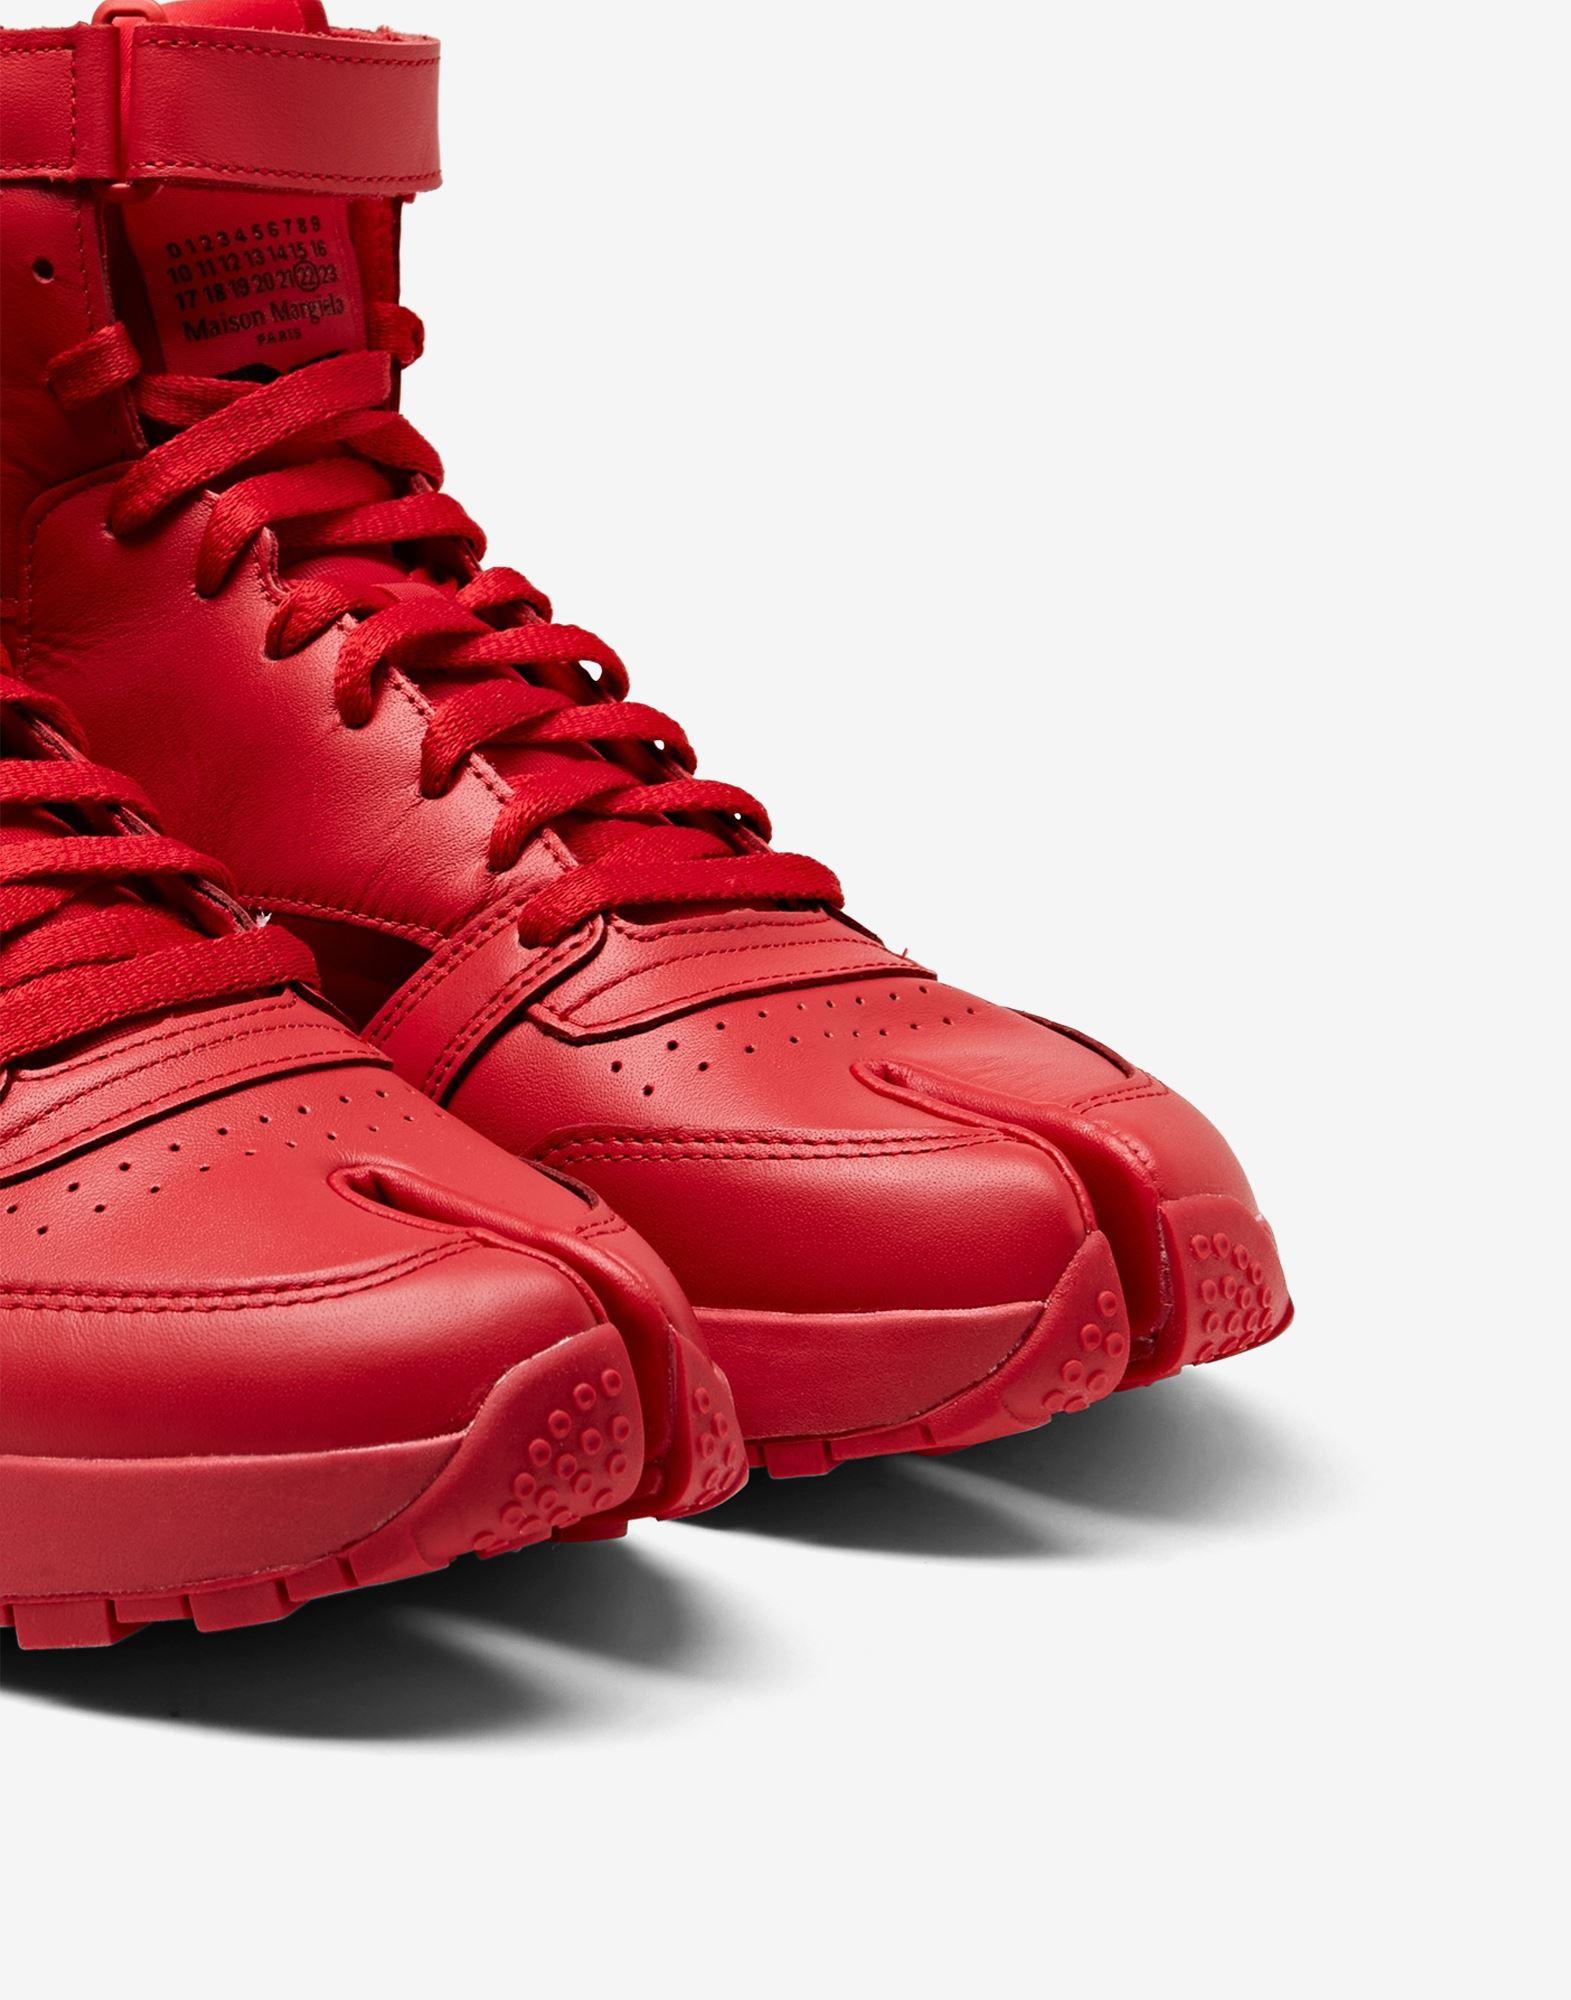 Maison Margiela Mm X Reebok Classic Leather Tabi High-top Sneakers in Red  for Men - Lyst